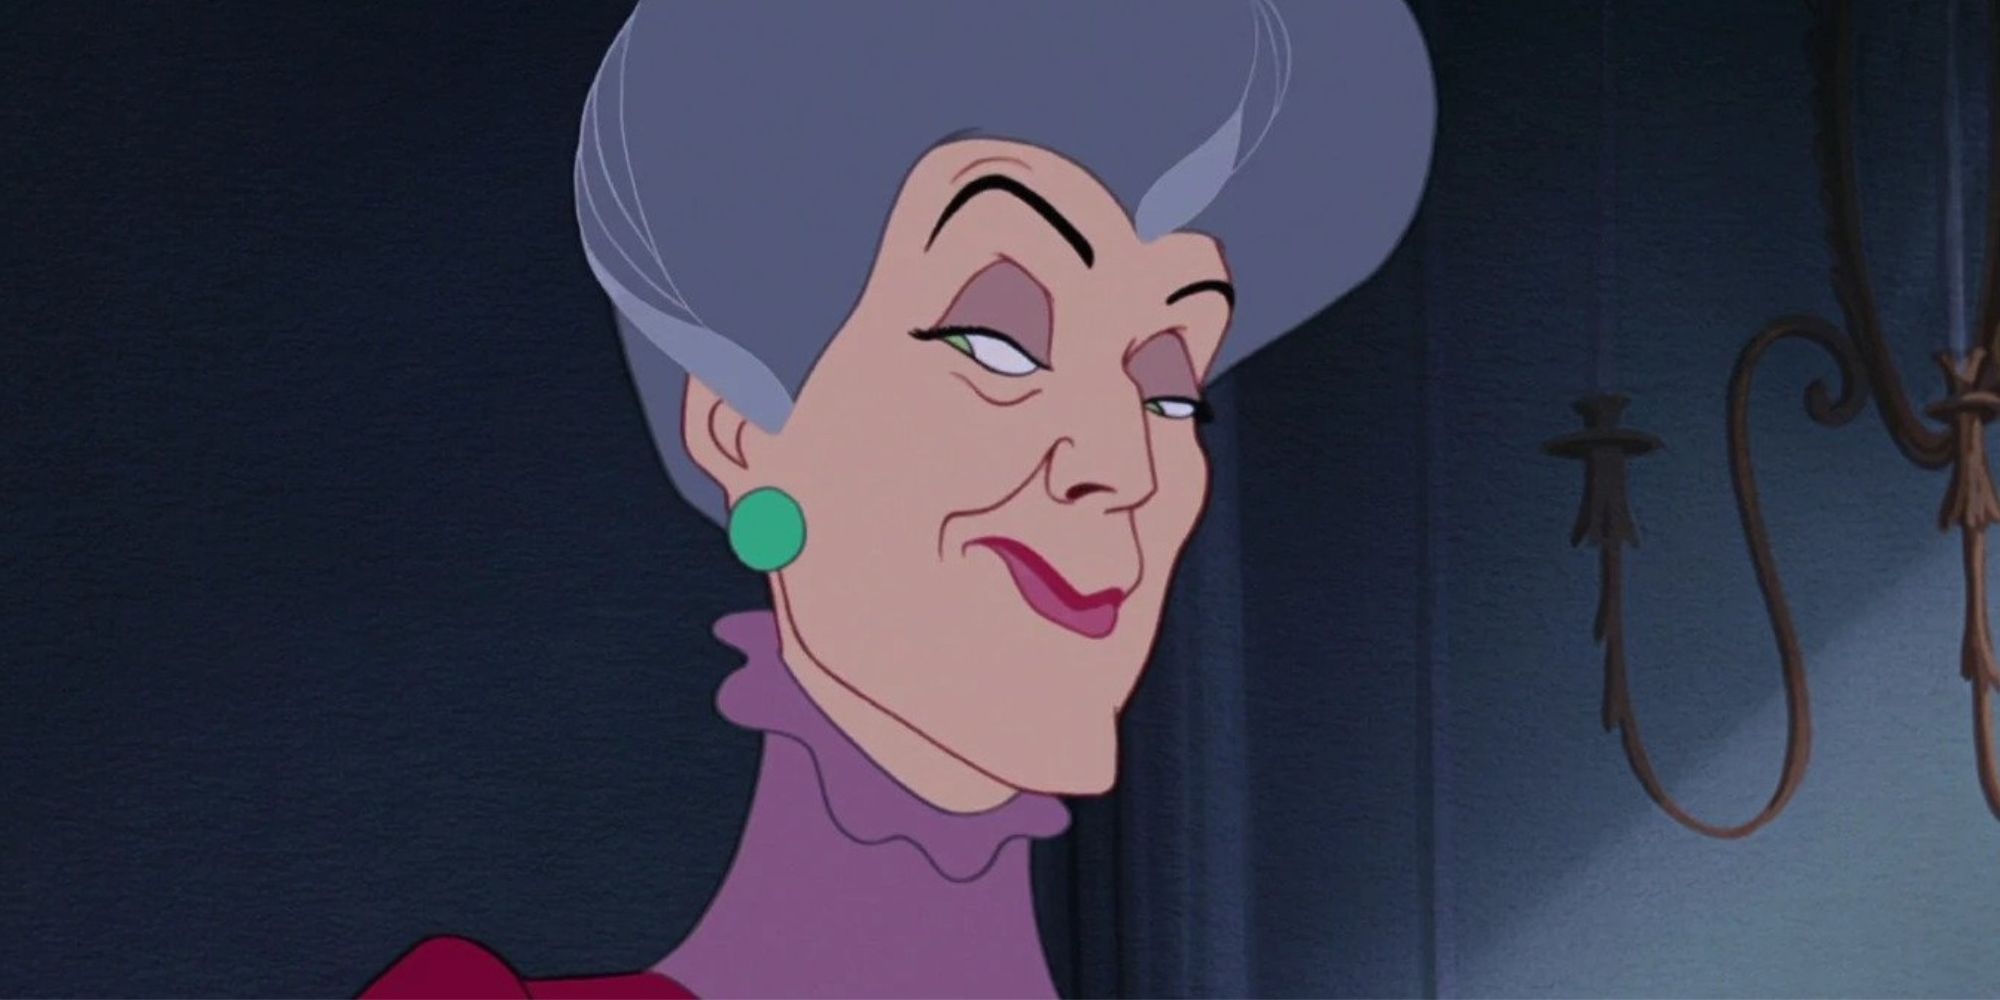 The evil step-mother in Cinderella